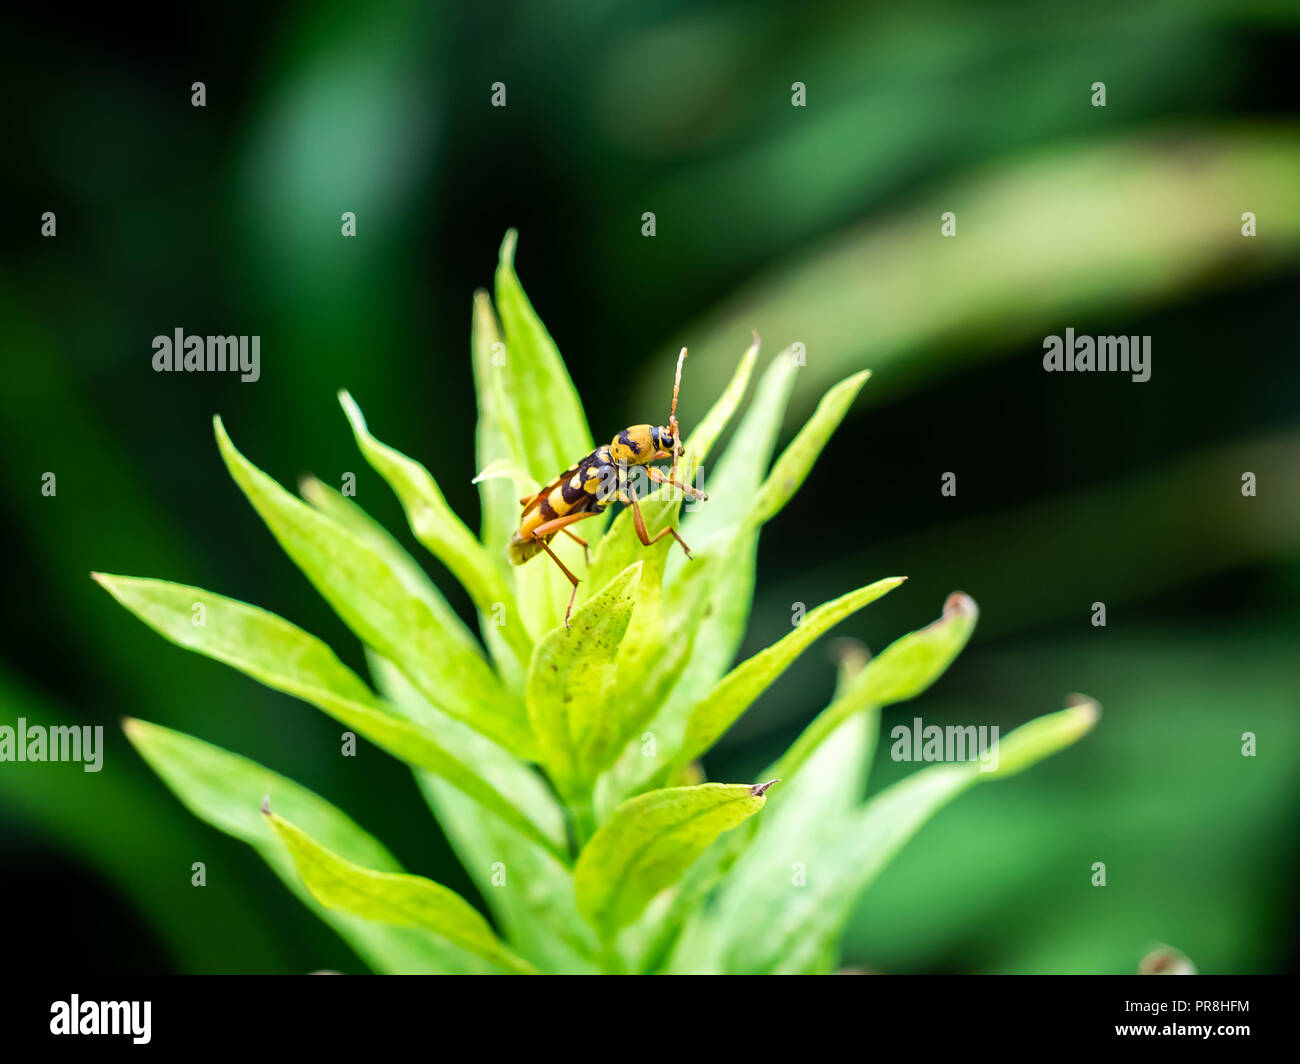 A small beetle feeds rests on some leaves in a small park in central Kanagawa, Japan Stock Photo